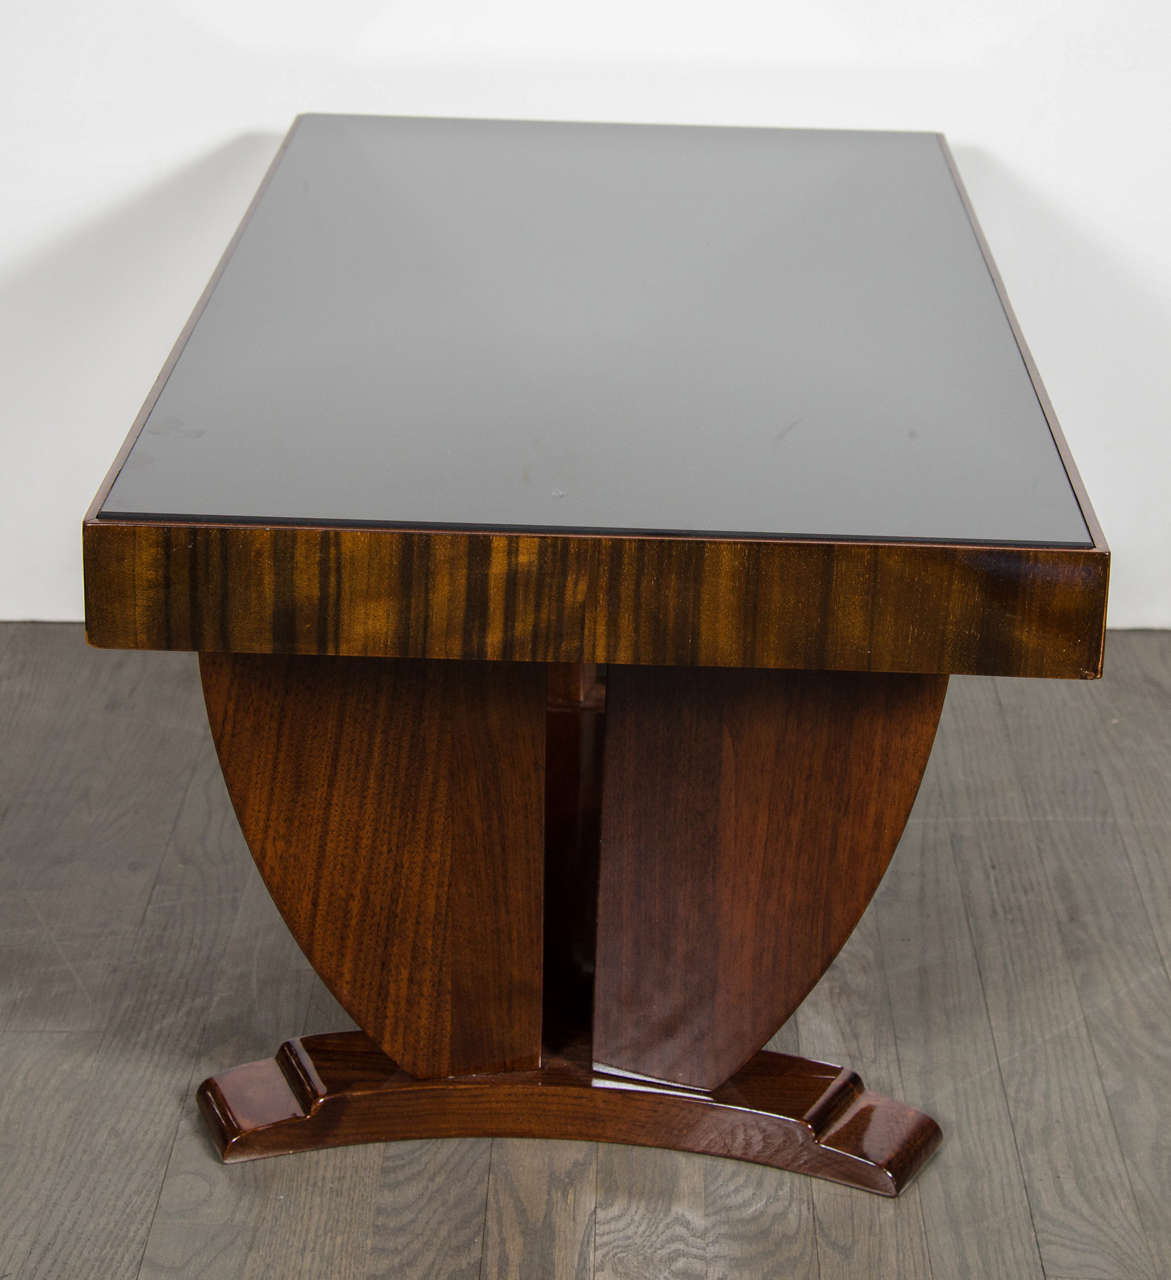 American Art Deco Skyscraper Style Cocktail Table in Book-Matched Walnut and Vitrolite Top